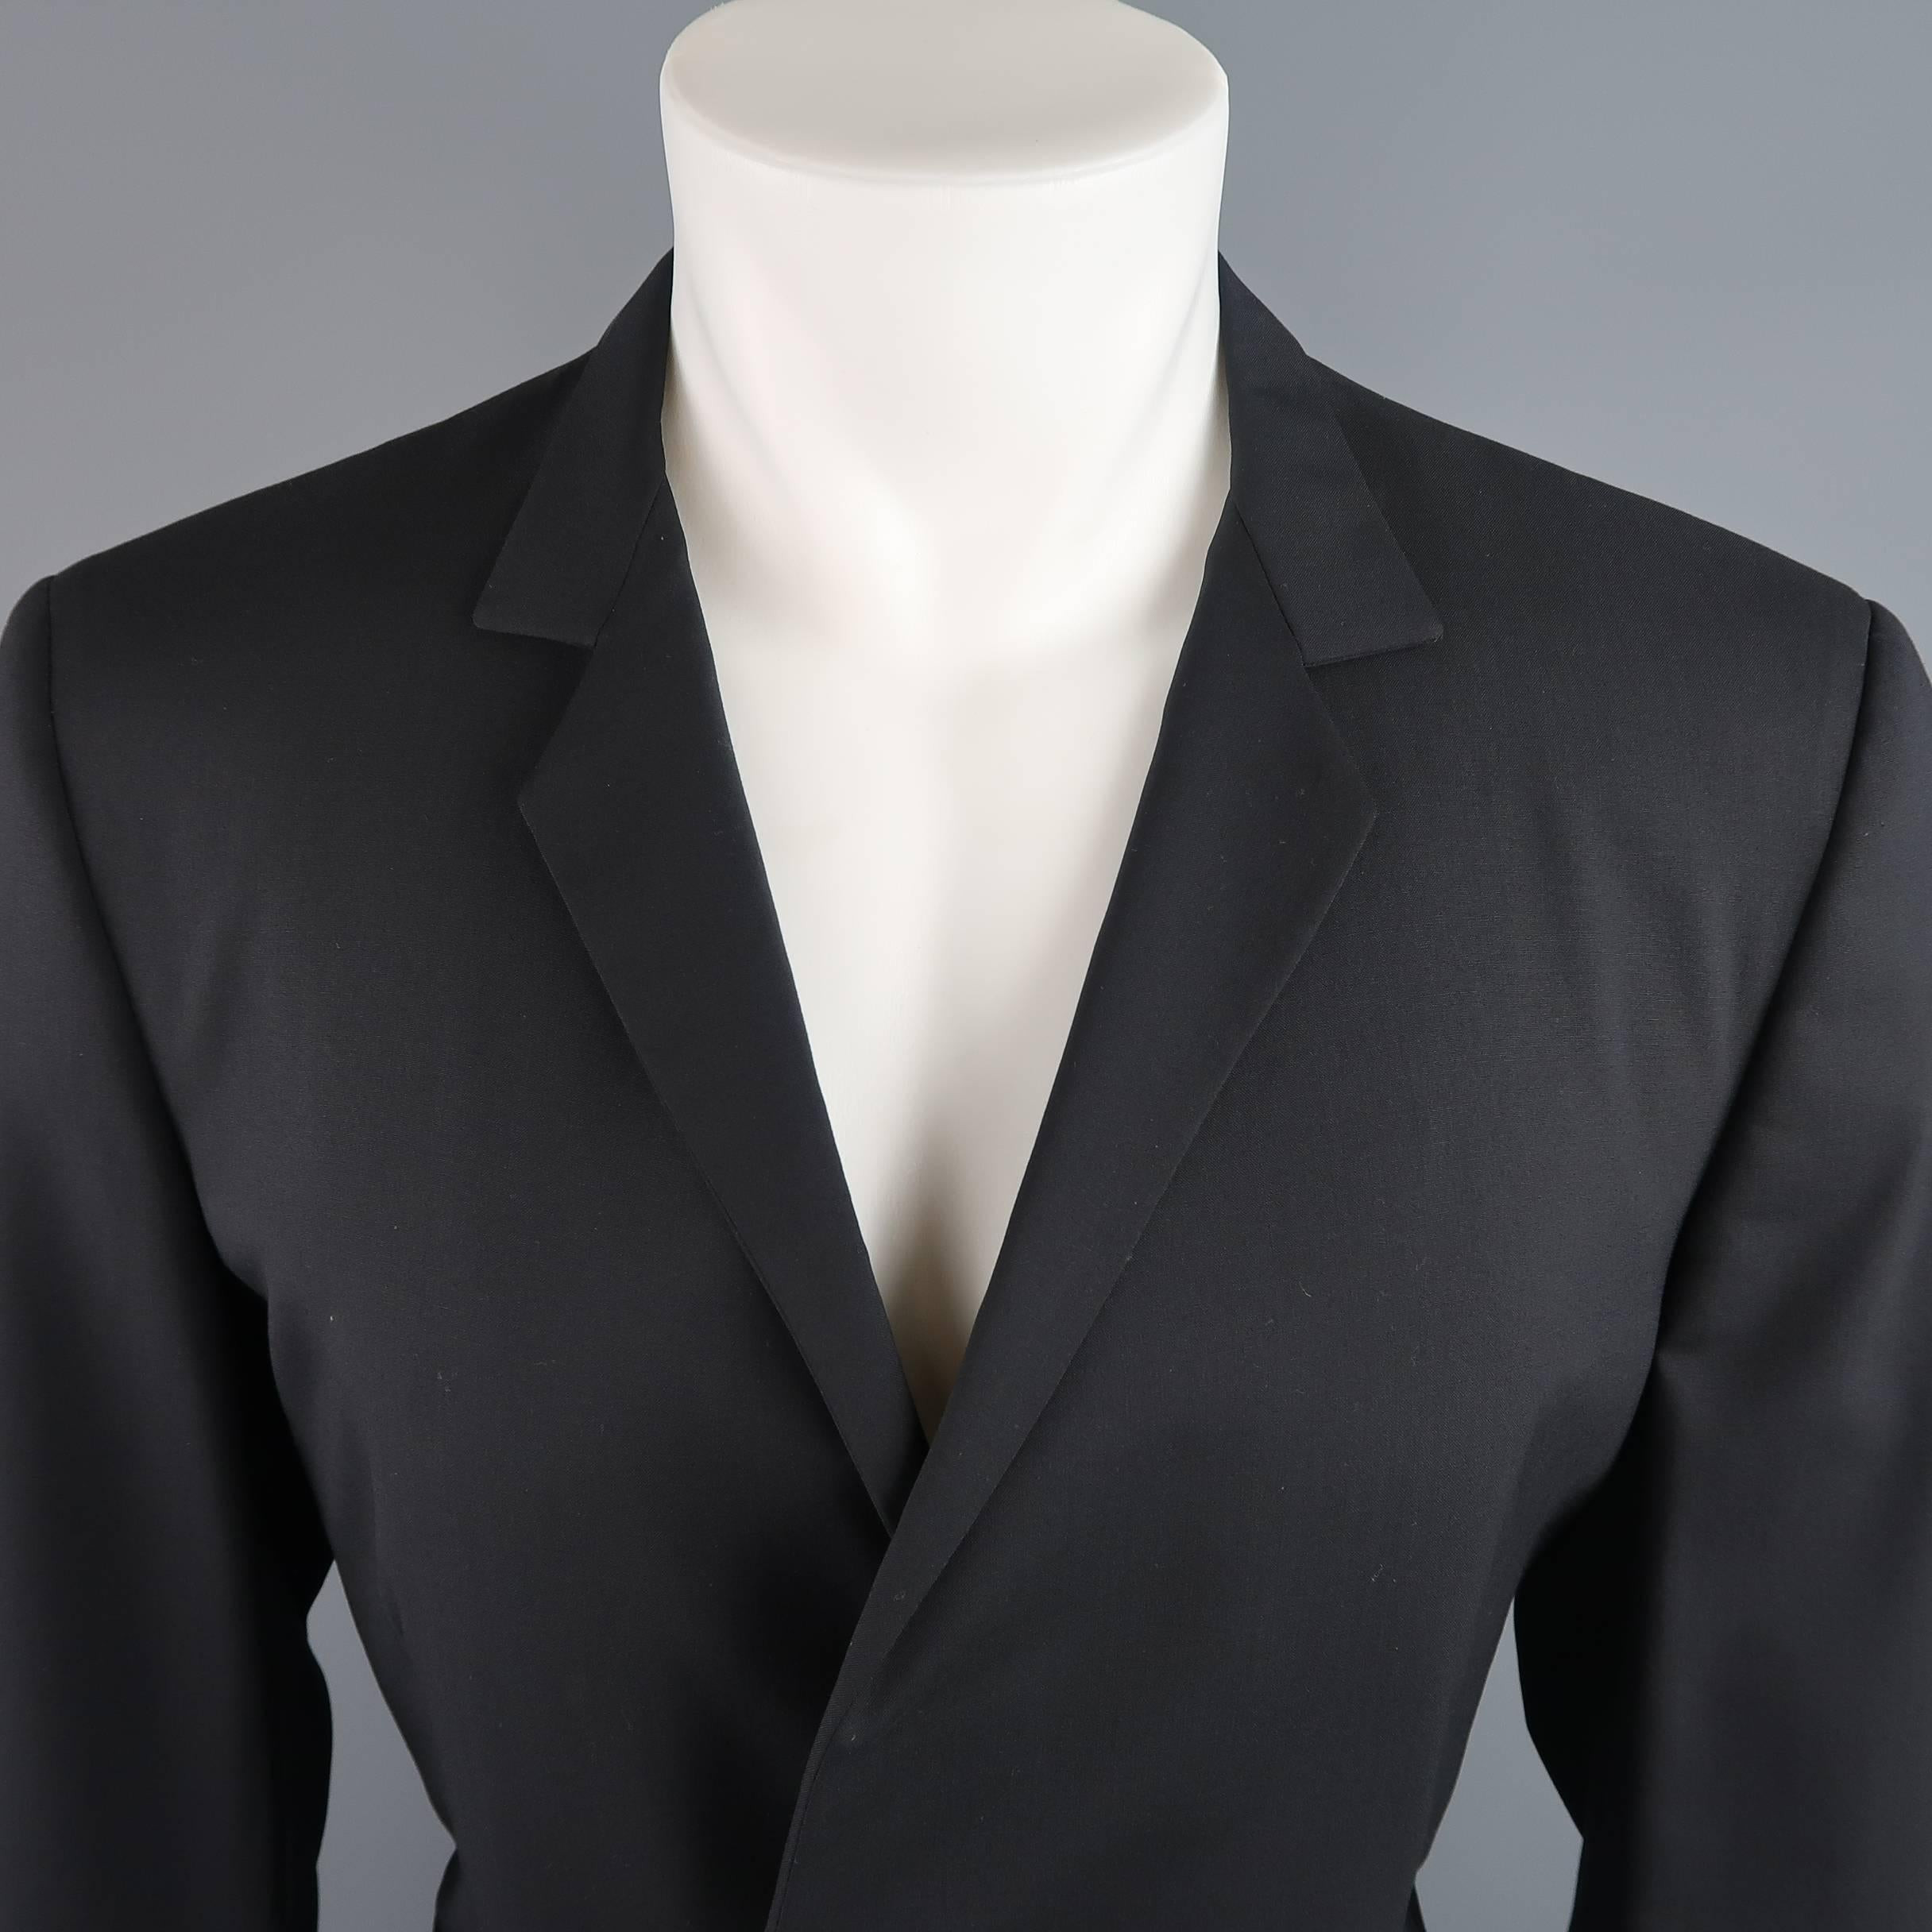 JIL SANDER sport coat jacket comes in a light weight wool and features a hidden placket, double breasted front, skinny notch lapel, hidden button cuffs, and optional belted waist. Minor wear on belt buckle.
 
Good Pre-Owned Condition.
Marked: IT 48
